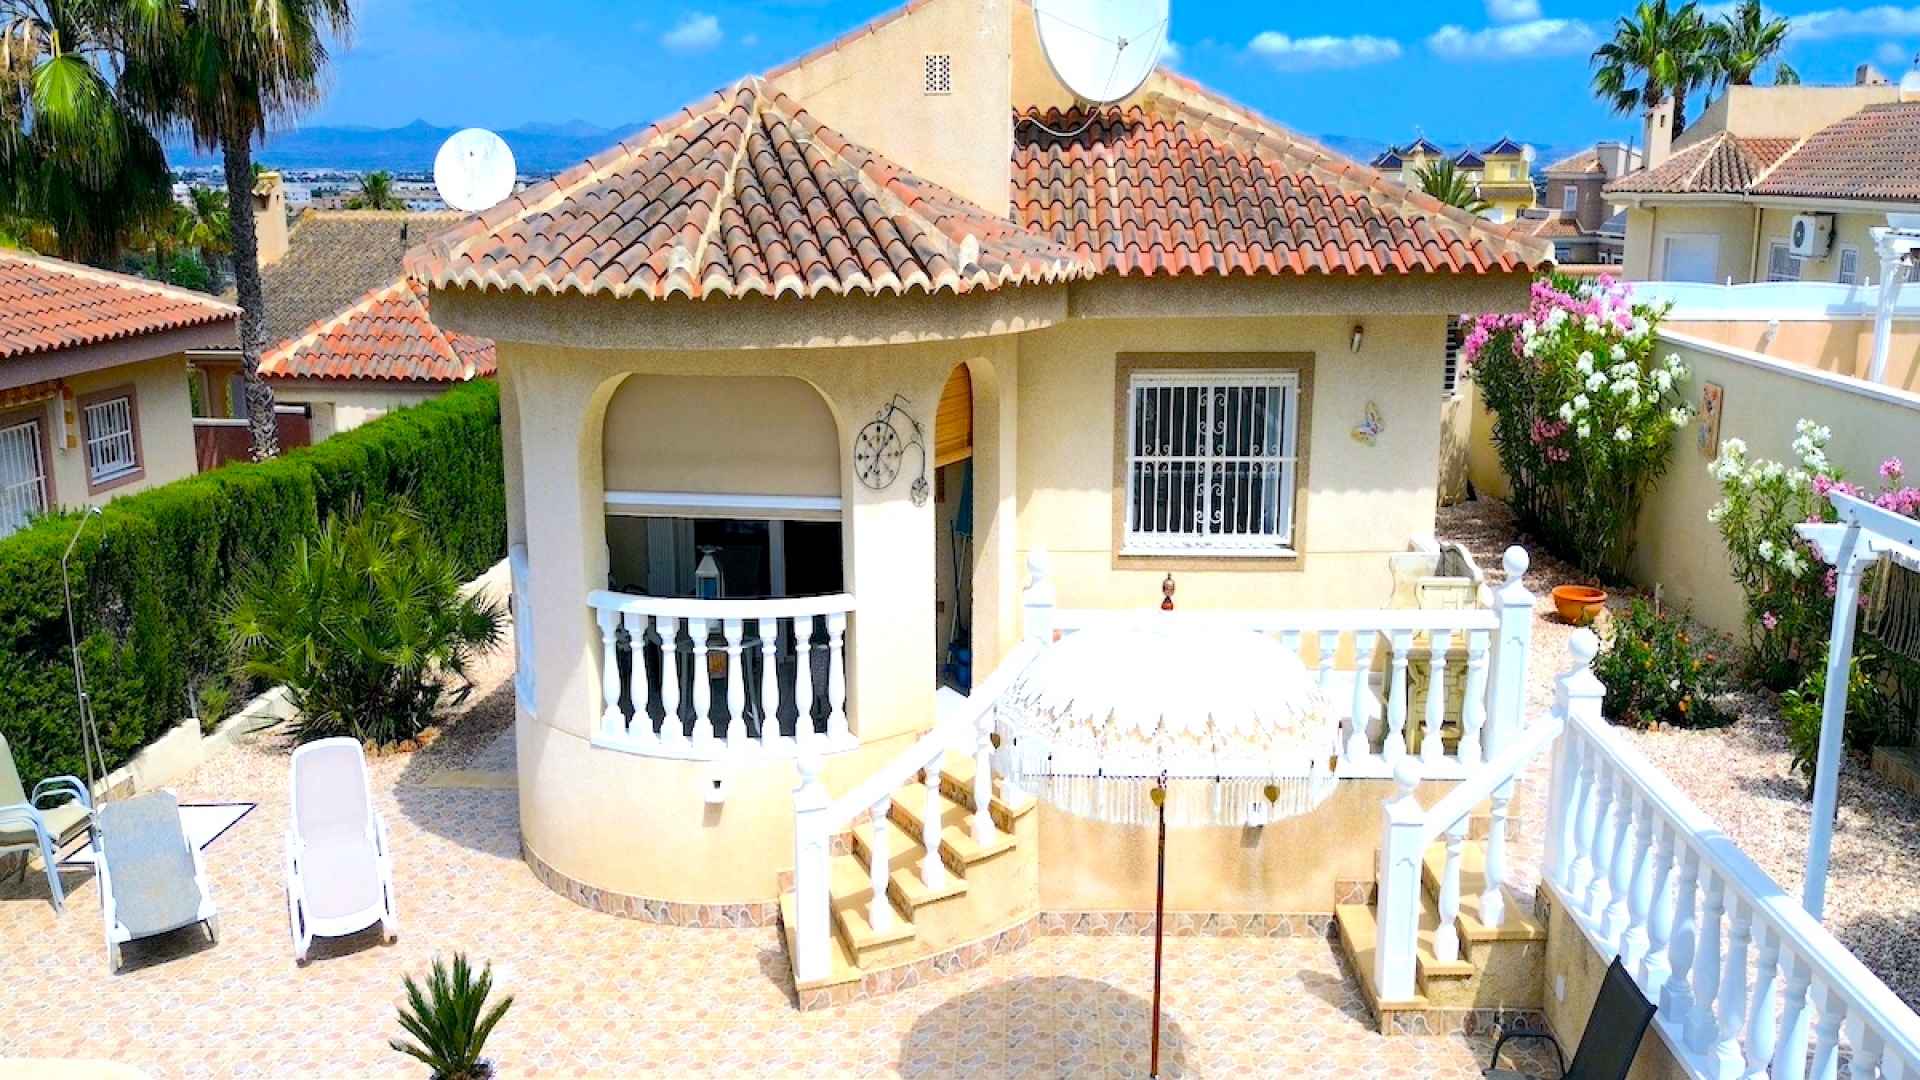 48478_delightful_south_facing_detached_villa_with_guest_accommodation_120624113459_dji_0234